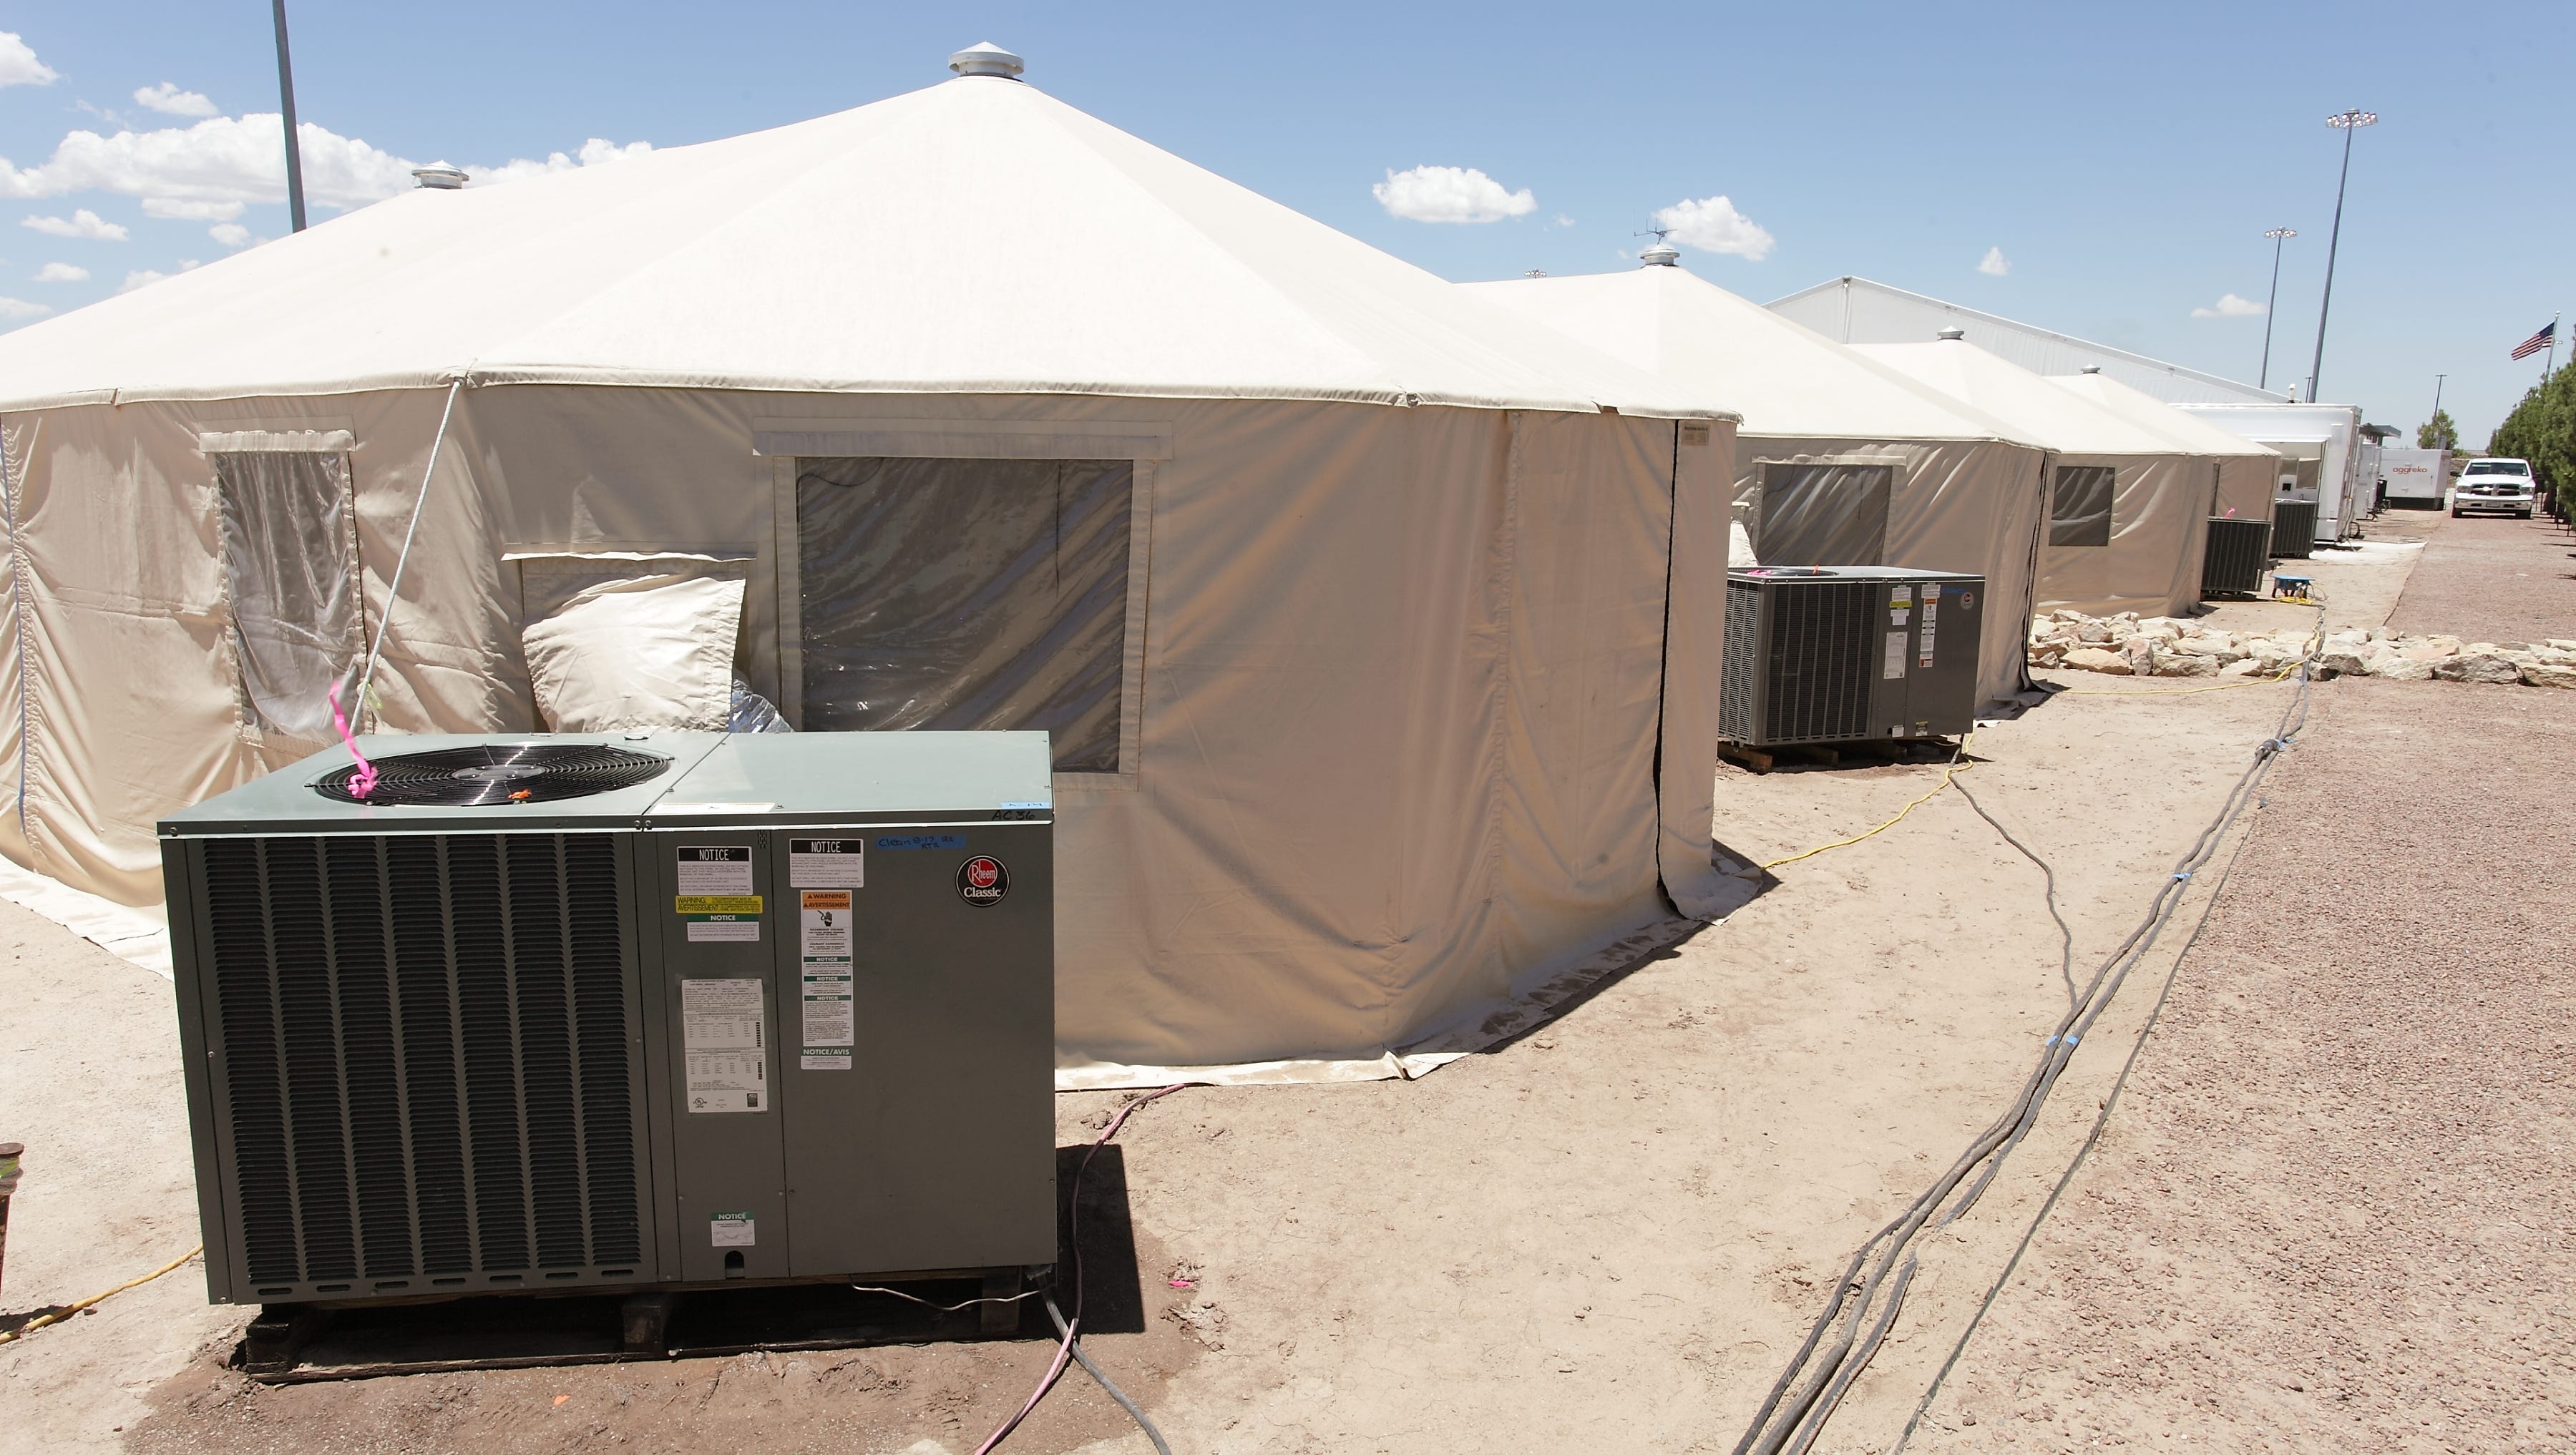 Tornillo tent shelter to stay open 30 days, no increase in capacity